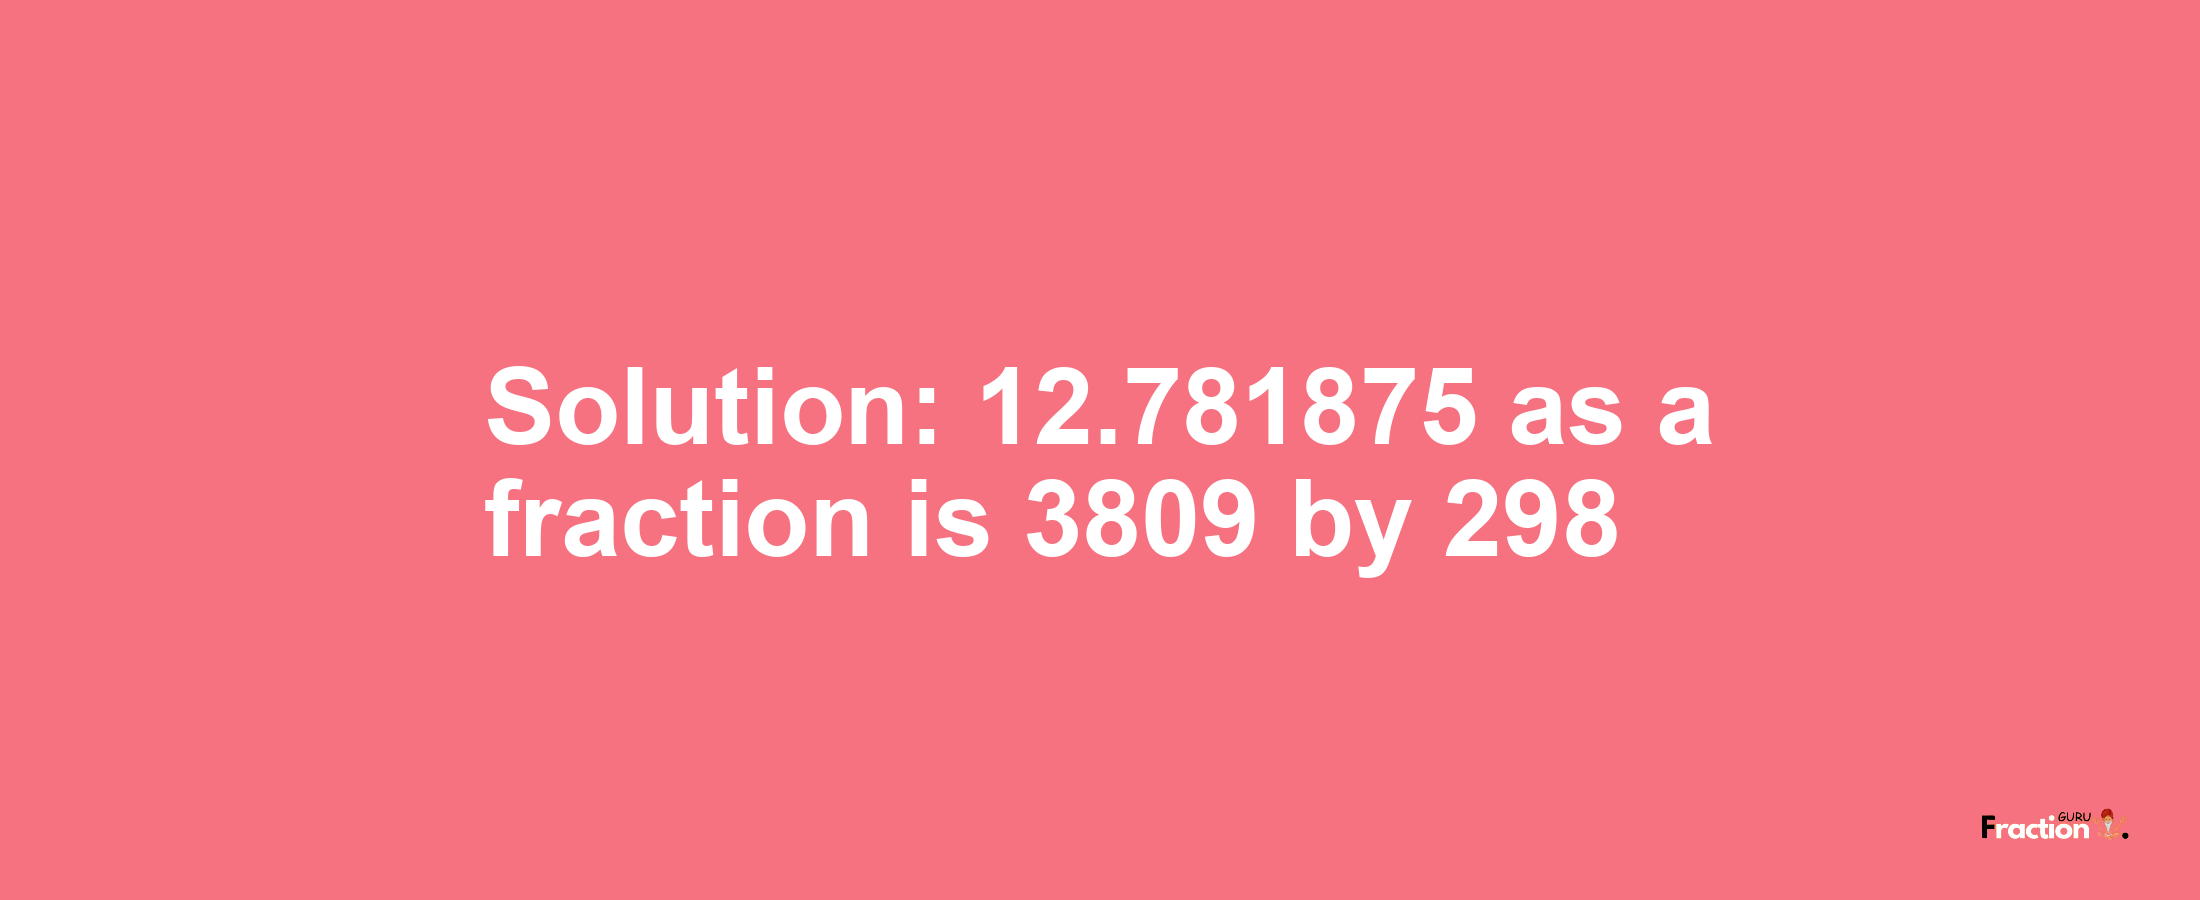 Solution:12.781875 as a fraction is 3809/298